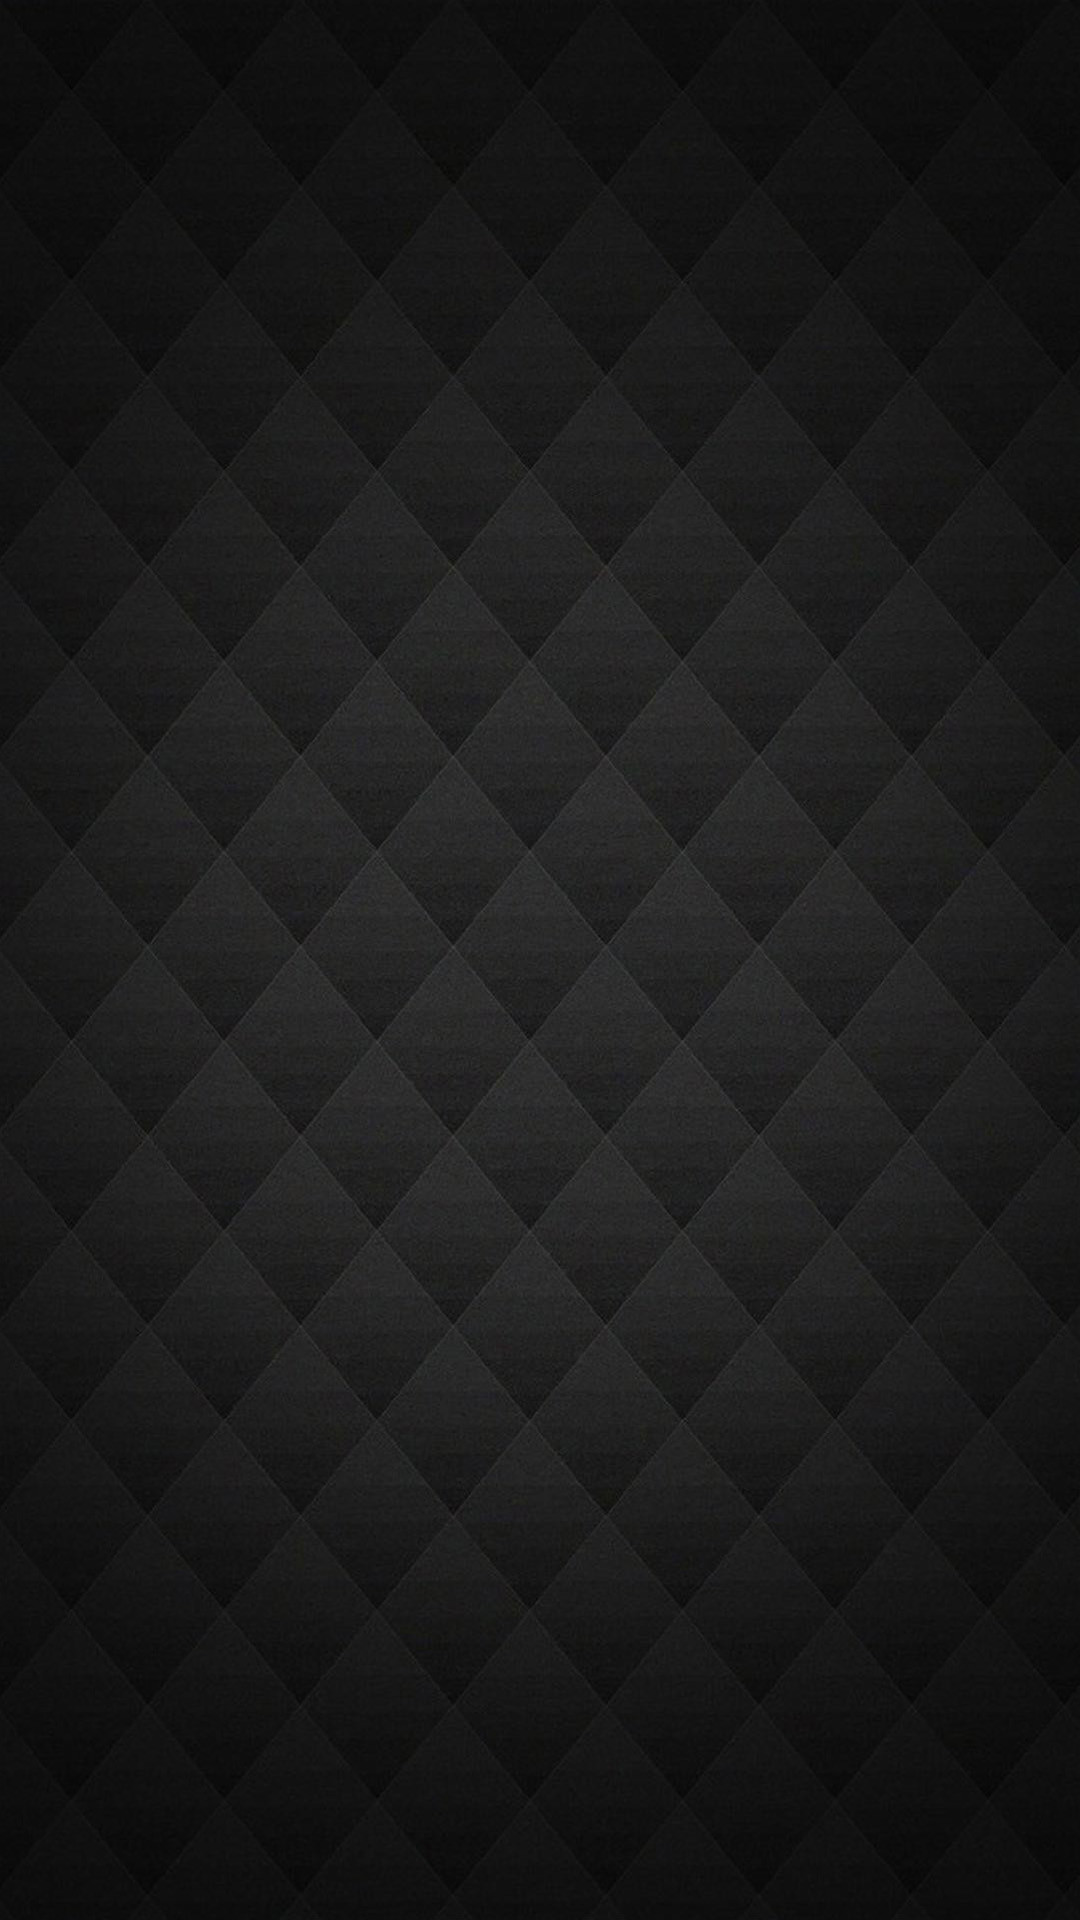 1080x1920 Black Galaxy Note 3 Wallpapers 012 HD Note Wallpapers Galaxy 